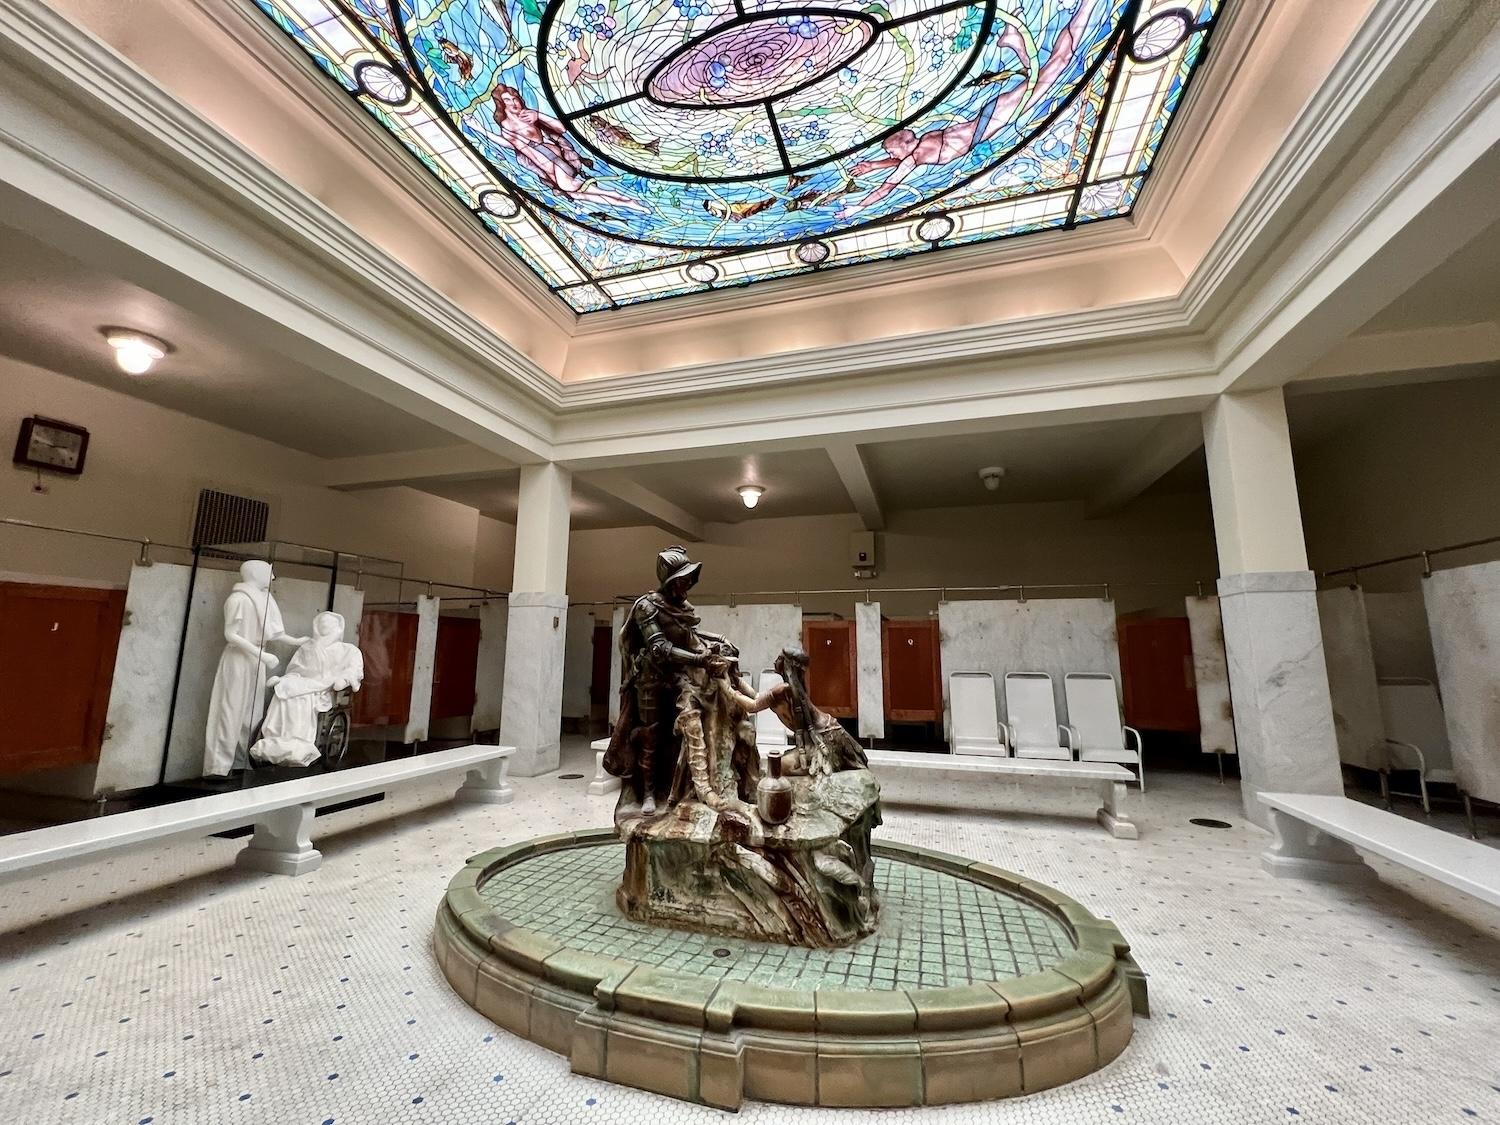 The medical bathing era was dominated by men, and the opulent men's bath hall at the Fordyce Bathhouse drives home this point.